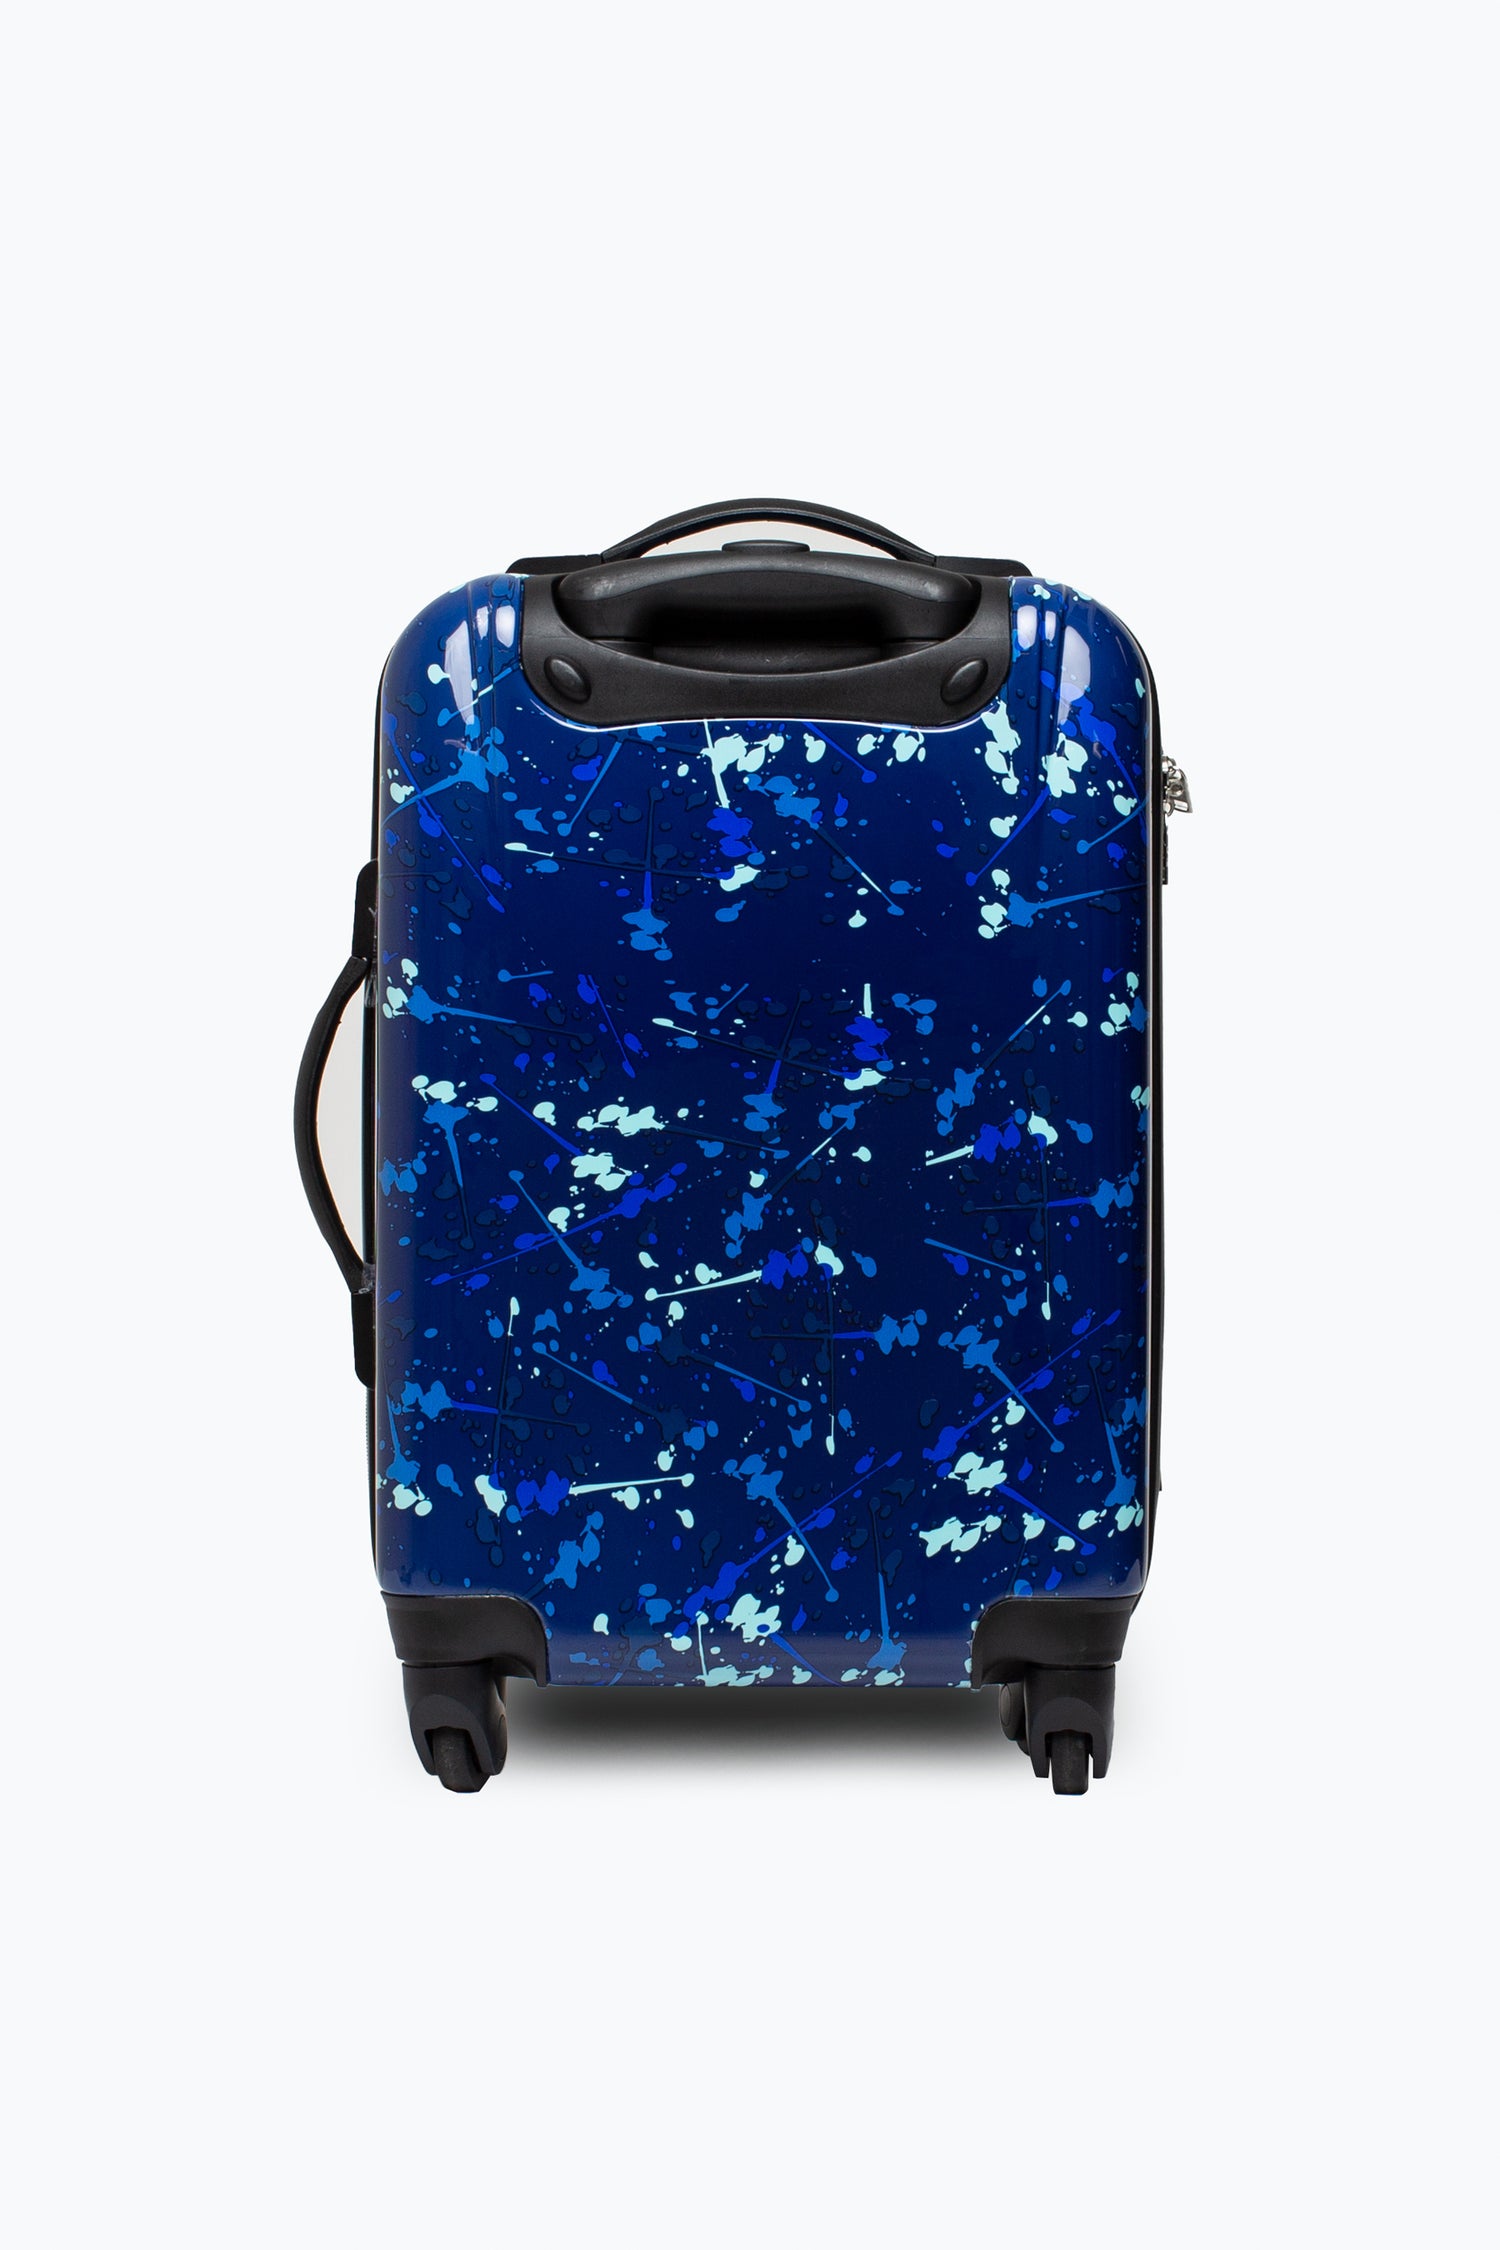 HYPE BLUE SPLAT SMALL SUITCASE